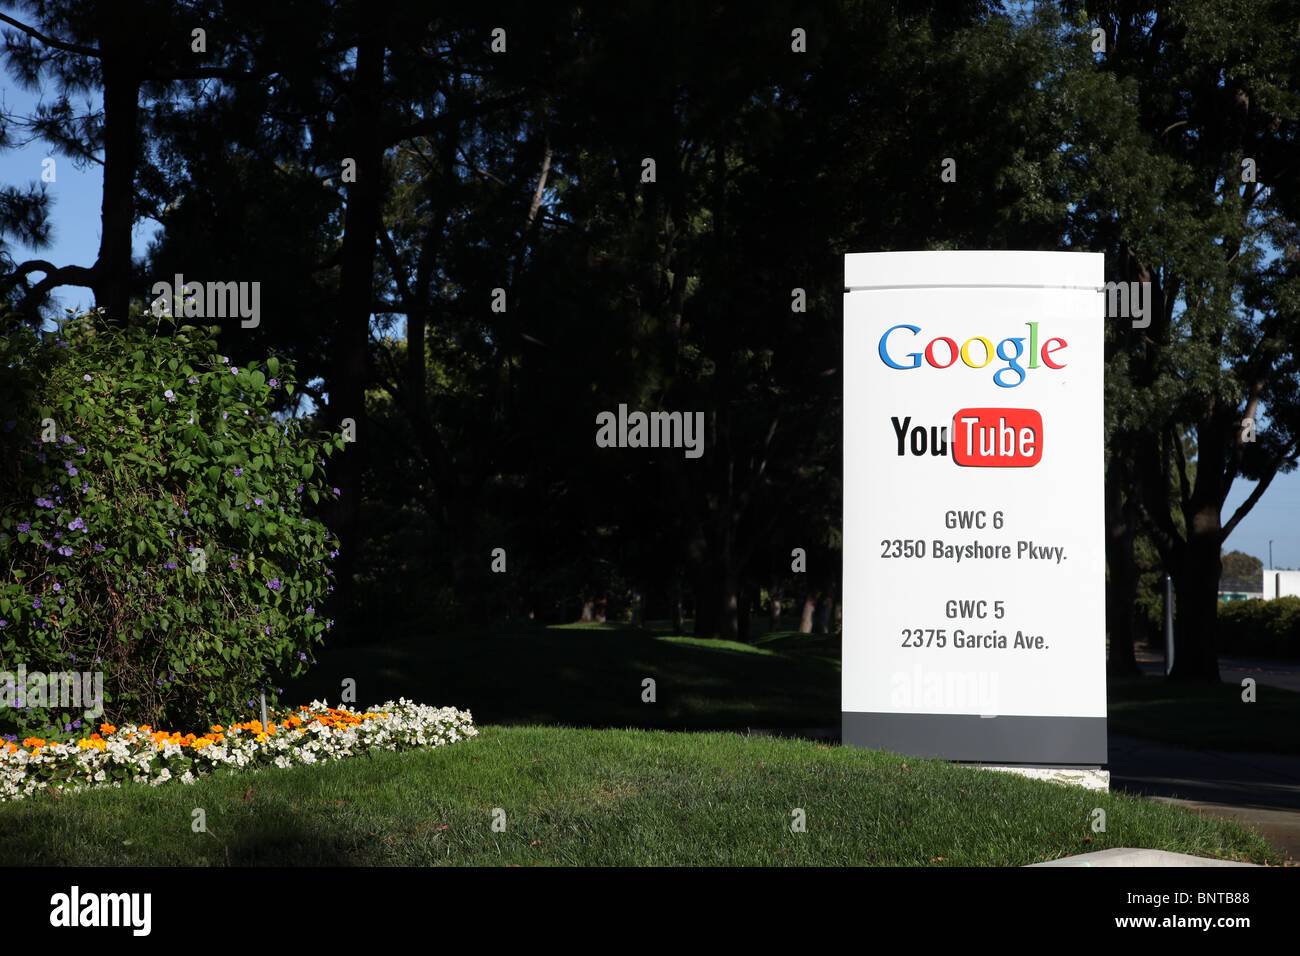 GOOGLE YOUTUBE SIGN 2350 BAYSHORE PARKWAY MOUNTAIN VIEW CALIFORNIE USA 2350 BAYSHORE PARKWAY 21 Juillet 2010 Banque D'Images